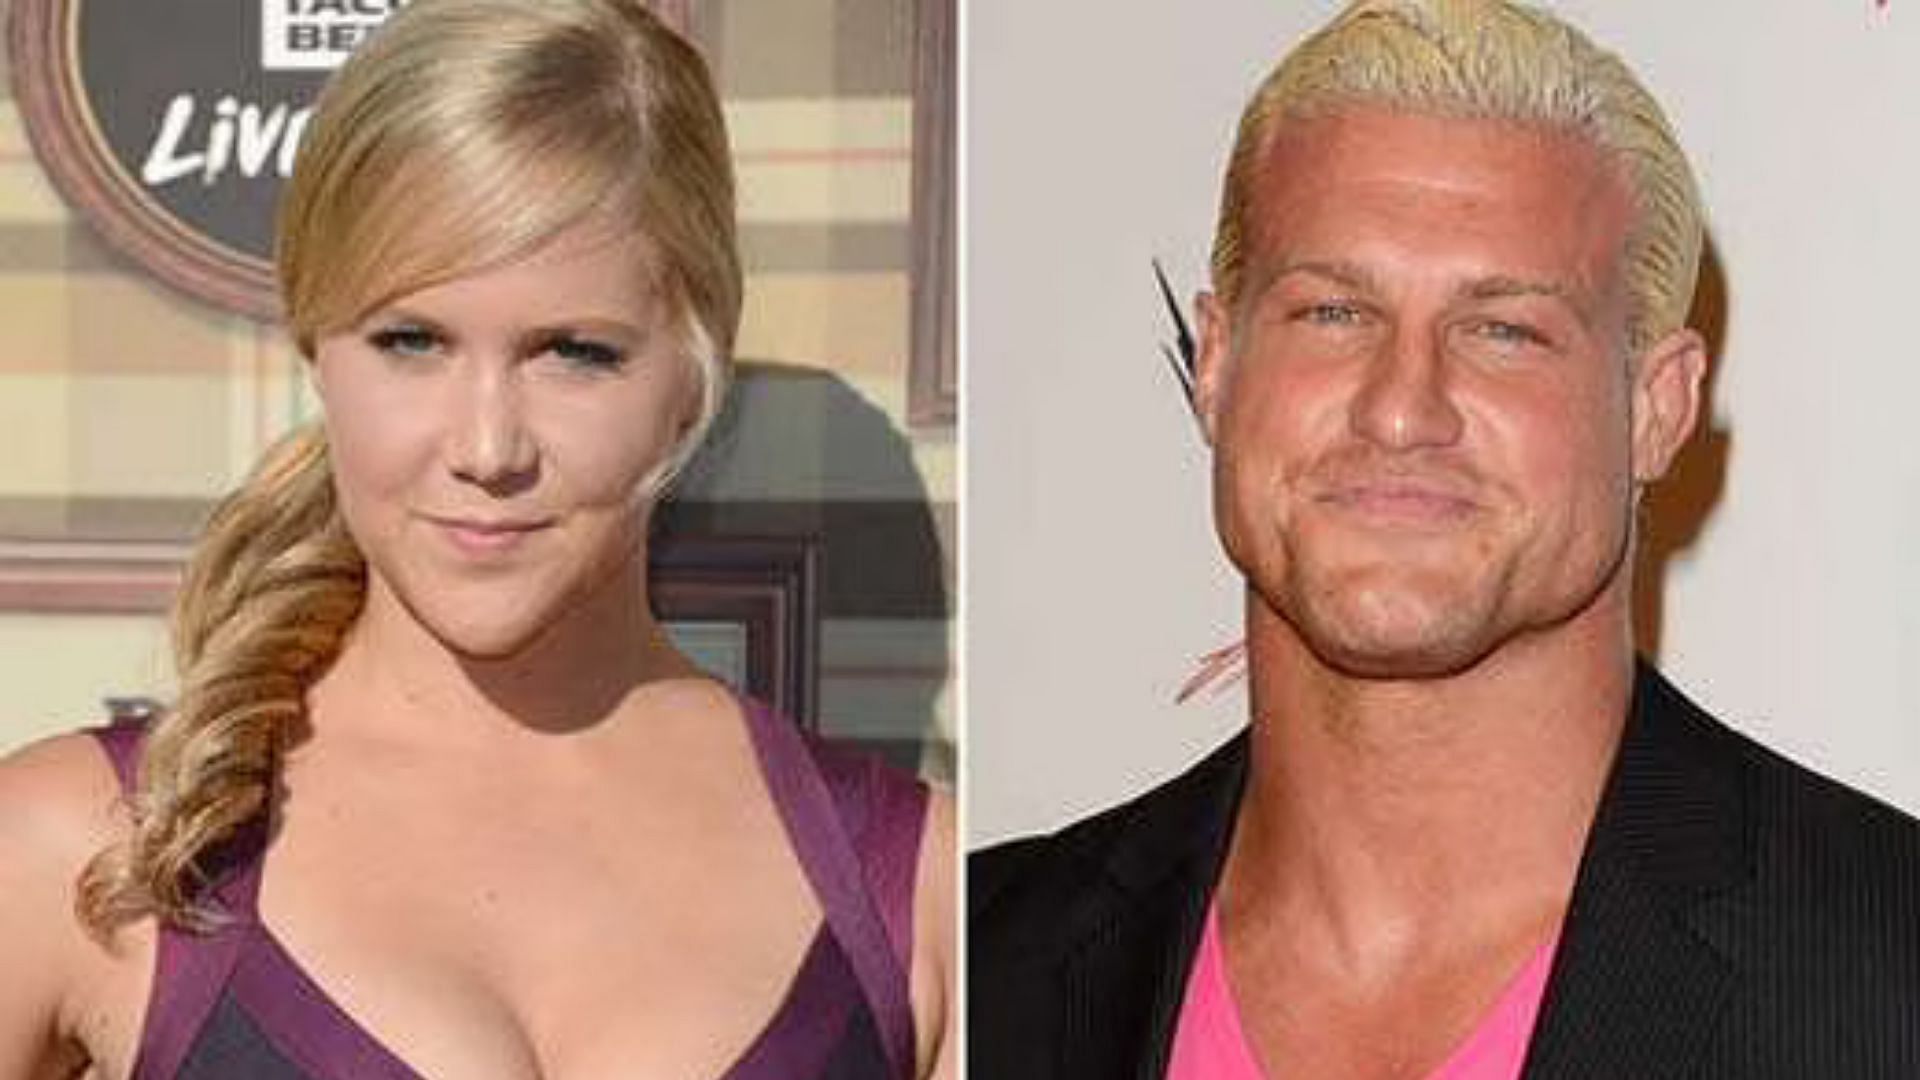 Ziggler&rsquo;s love life has had its share of highs and lows